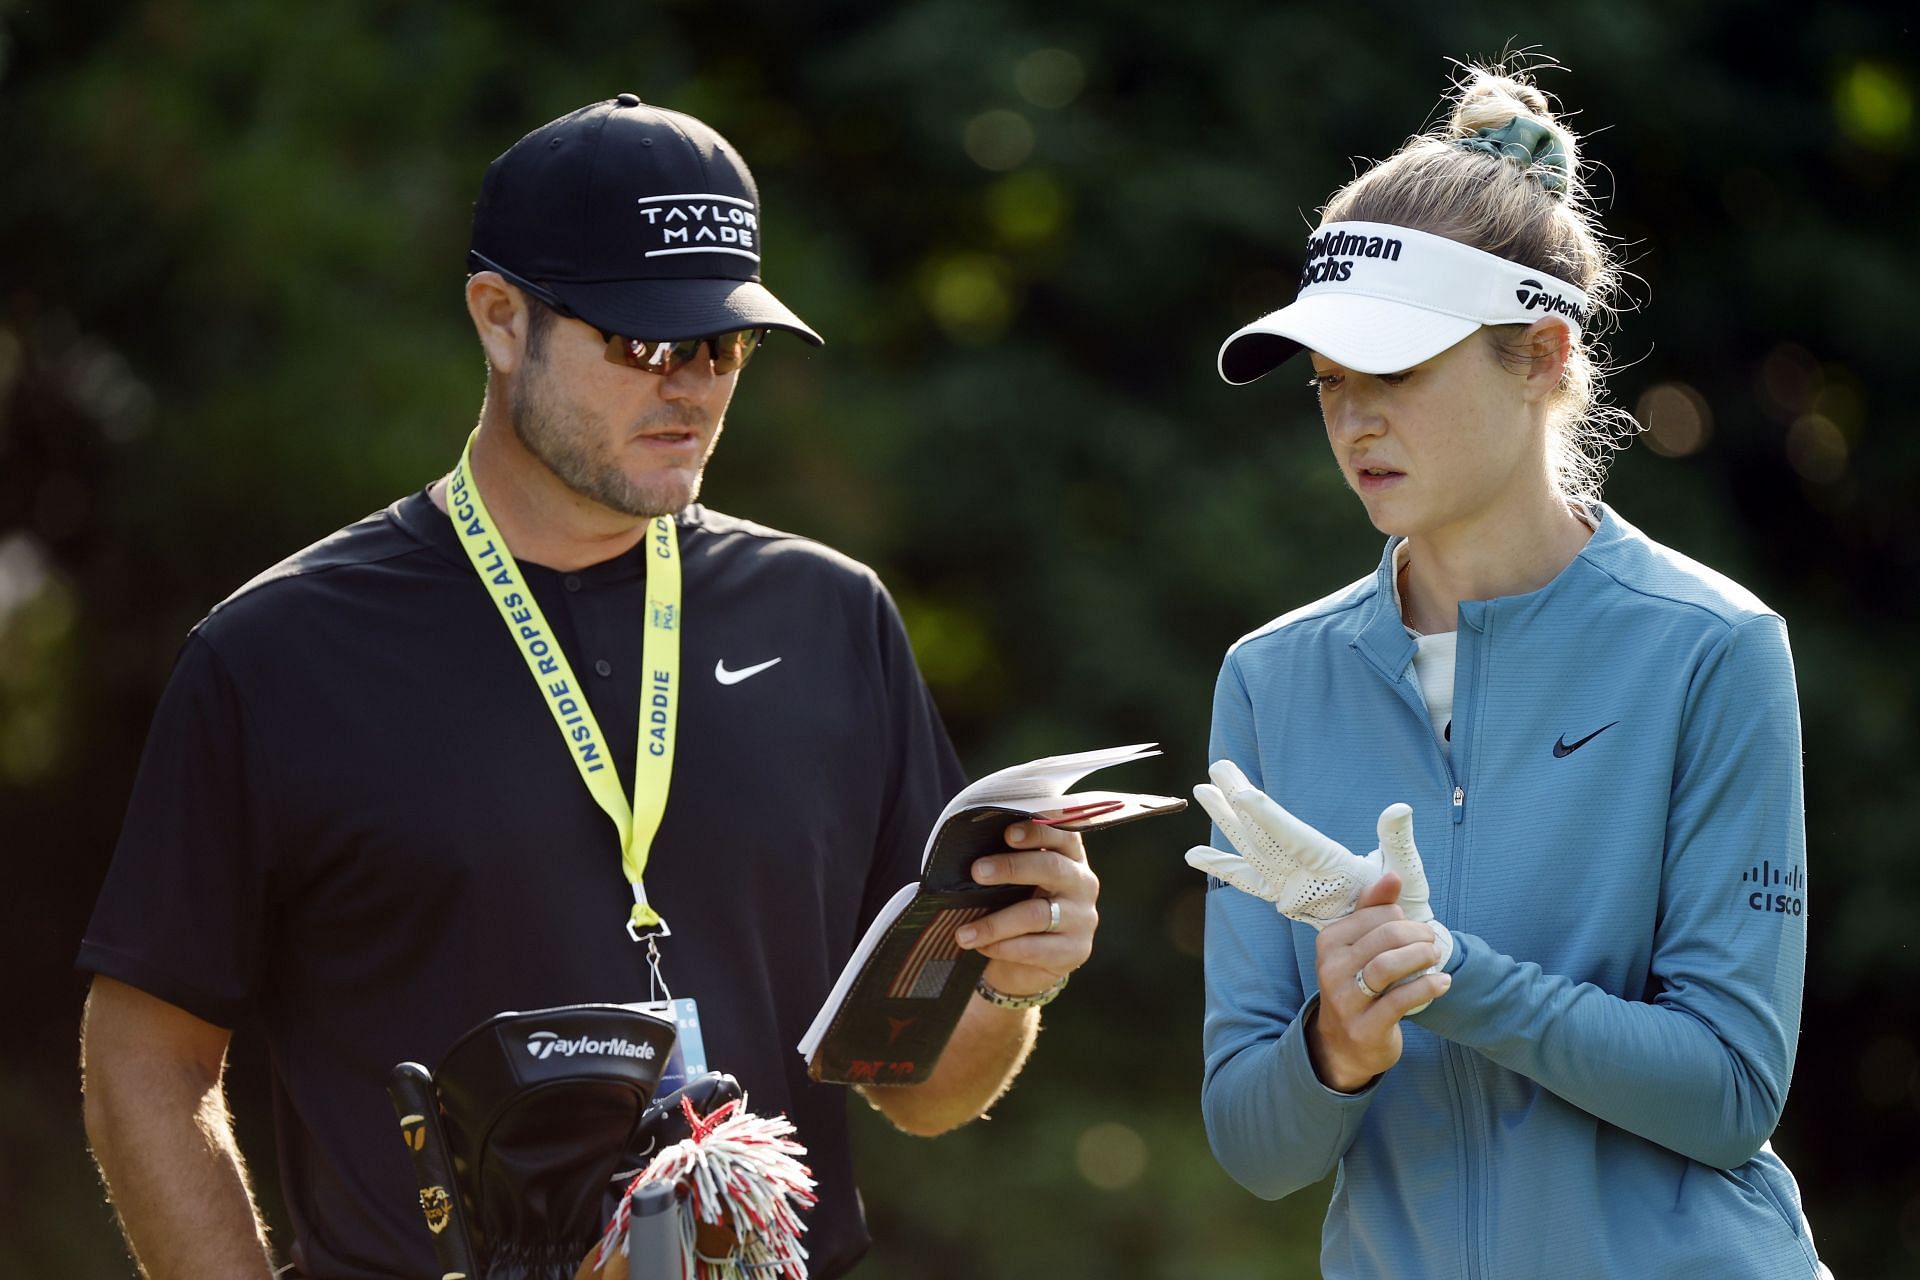 Nelly Korda at the KPMG Women's PGA Championship - Preview Day 1